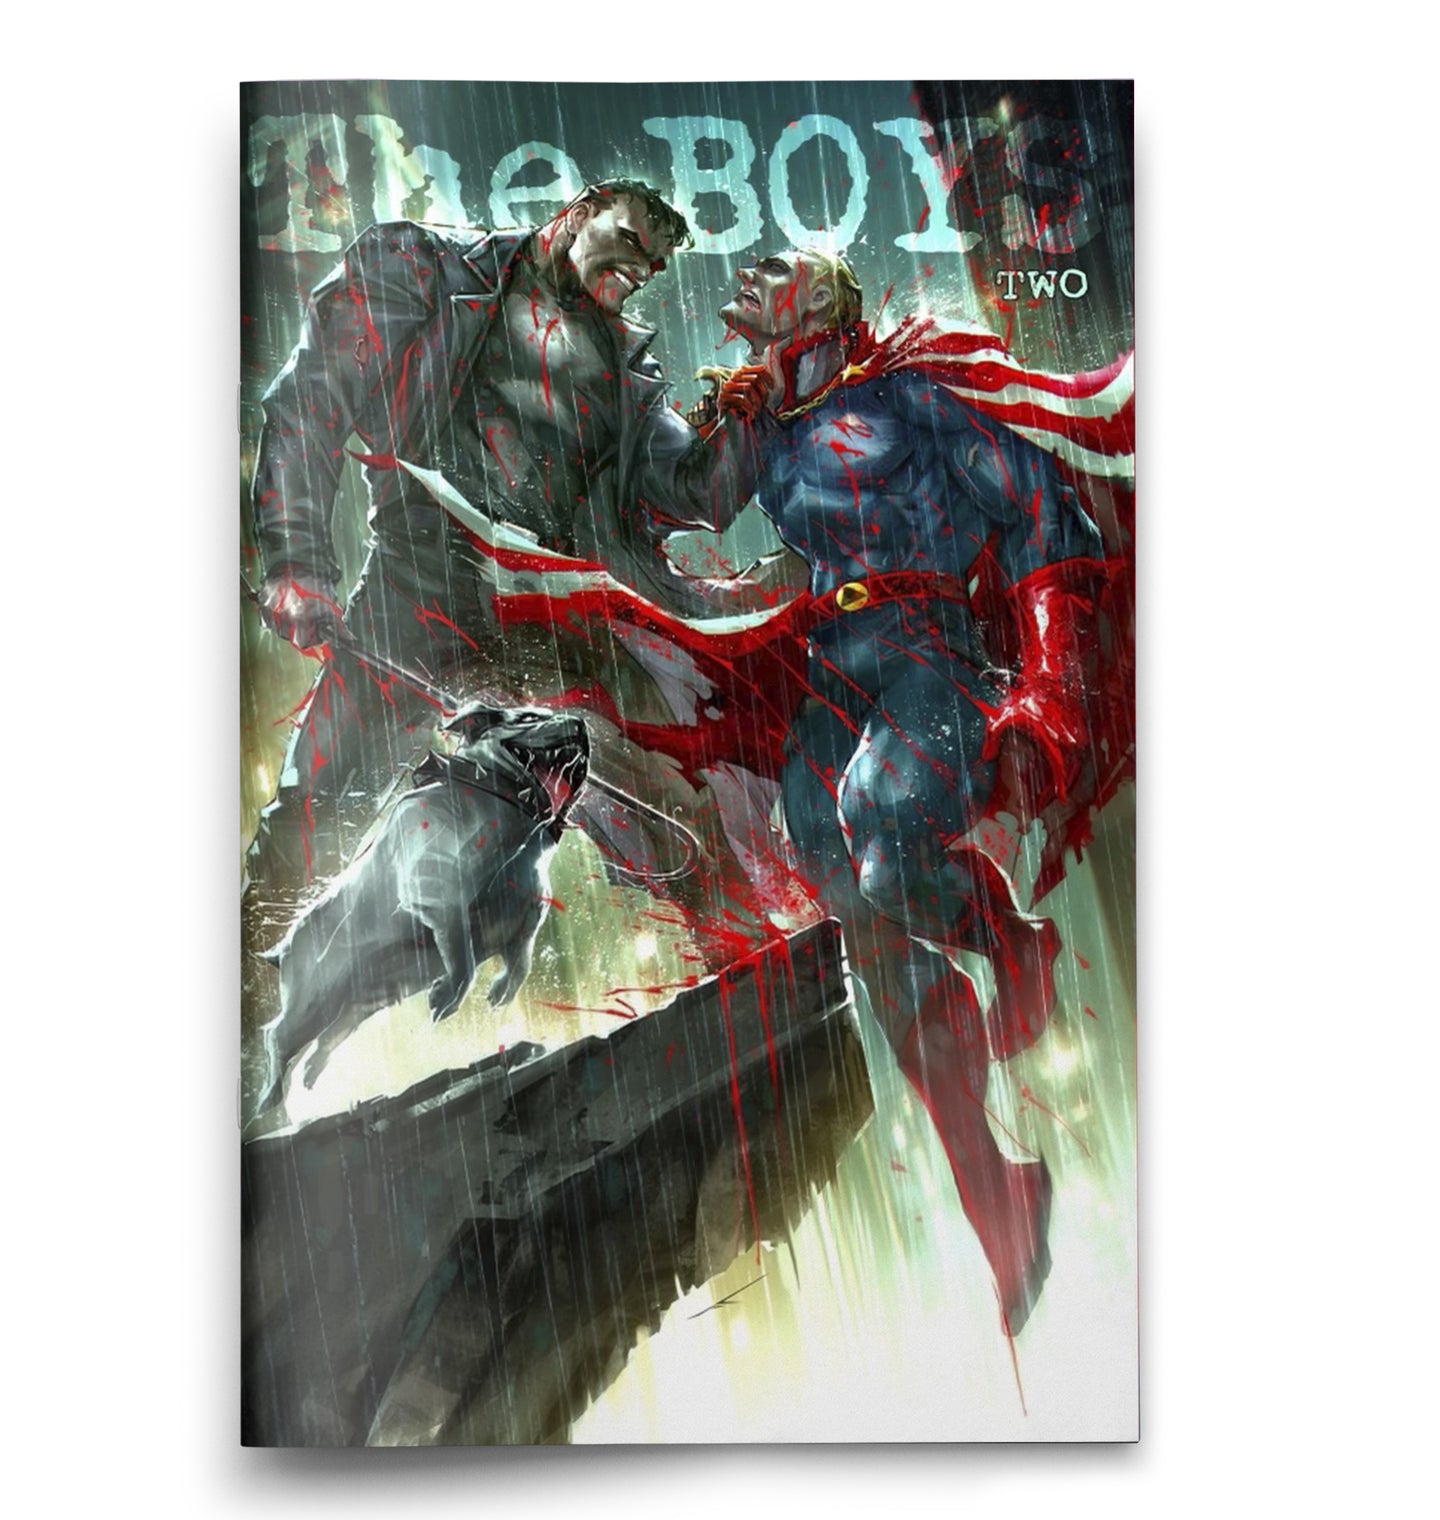 The Boys #2 Ivan Tao Cover - Trade - 500 Printed